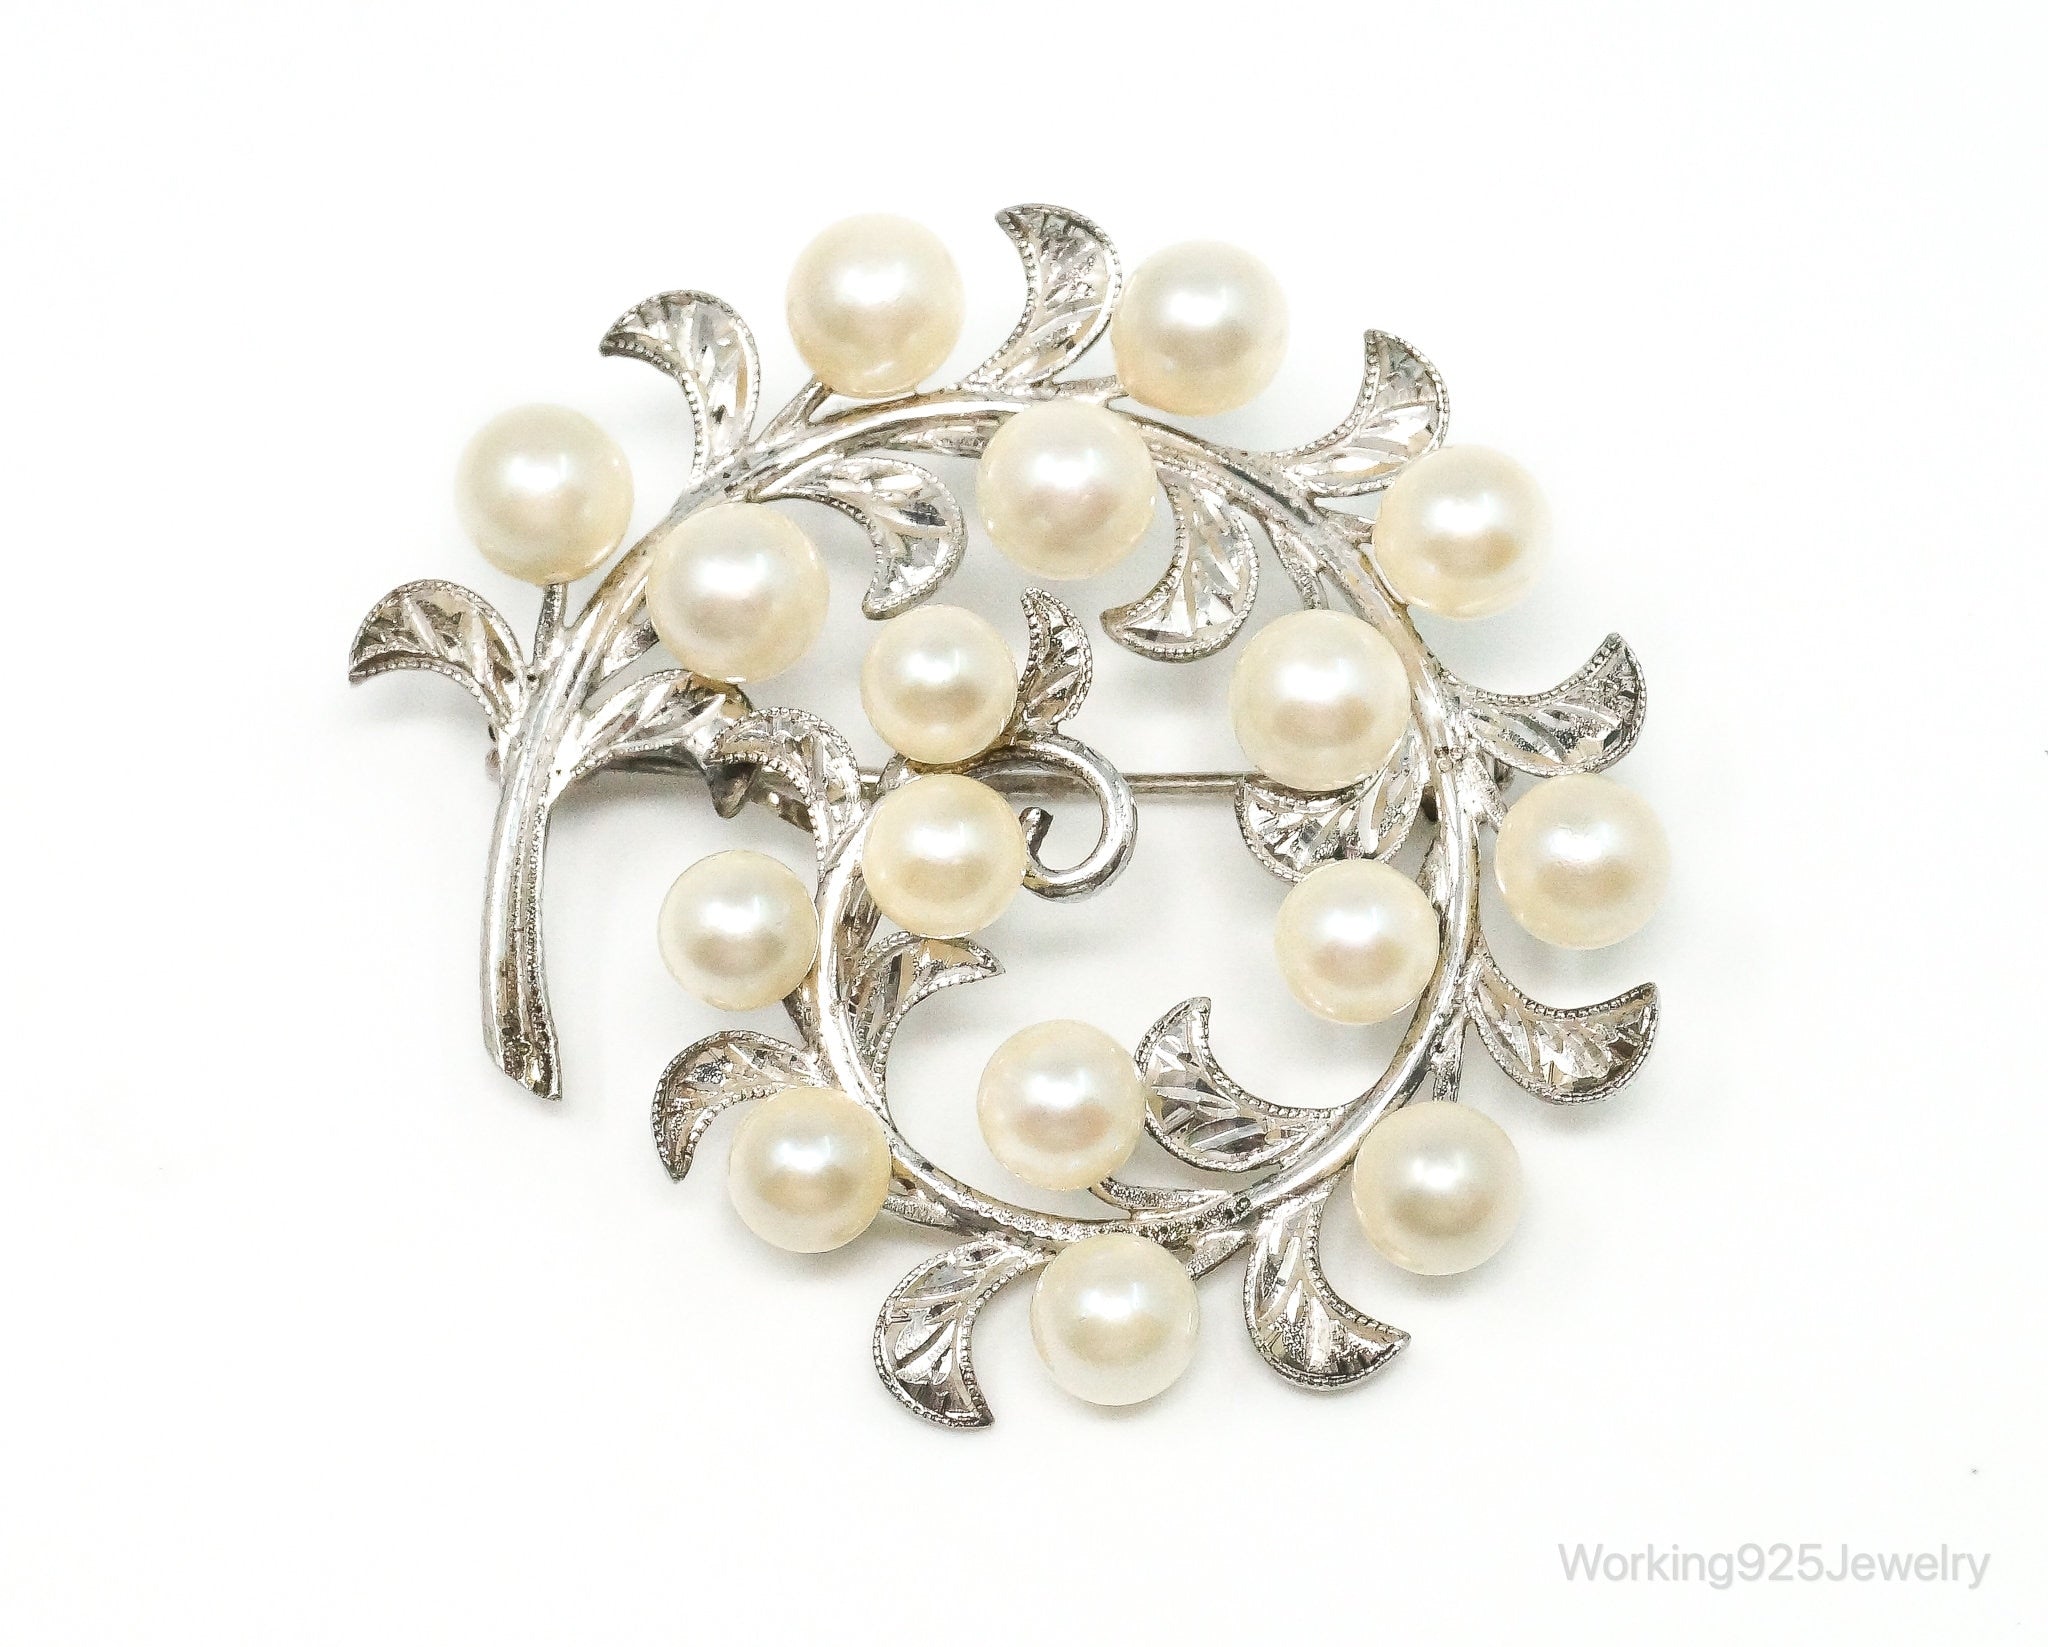 Large Antique Faux Pearl Sterling Silver Brooch Pin